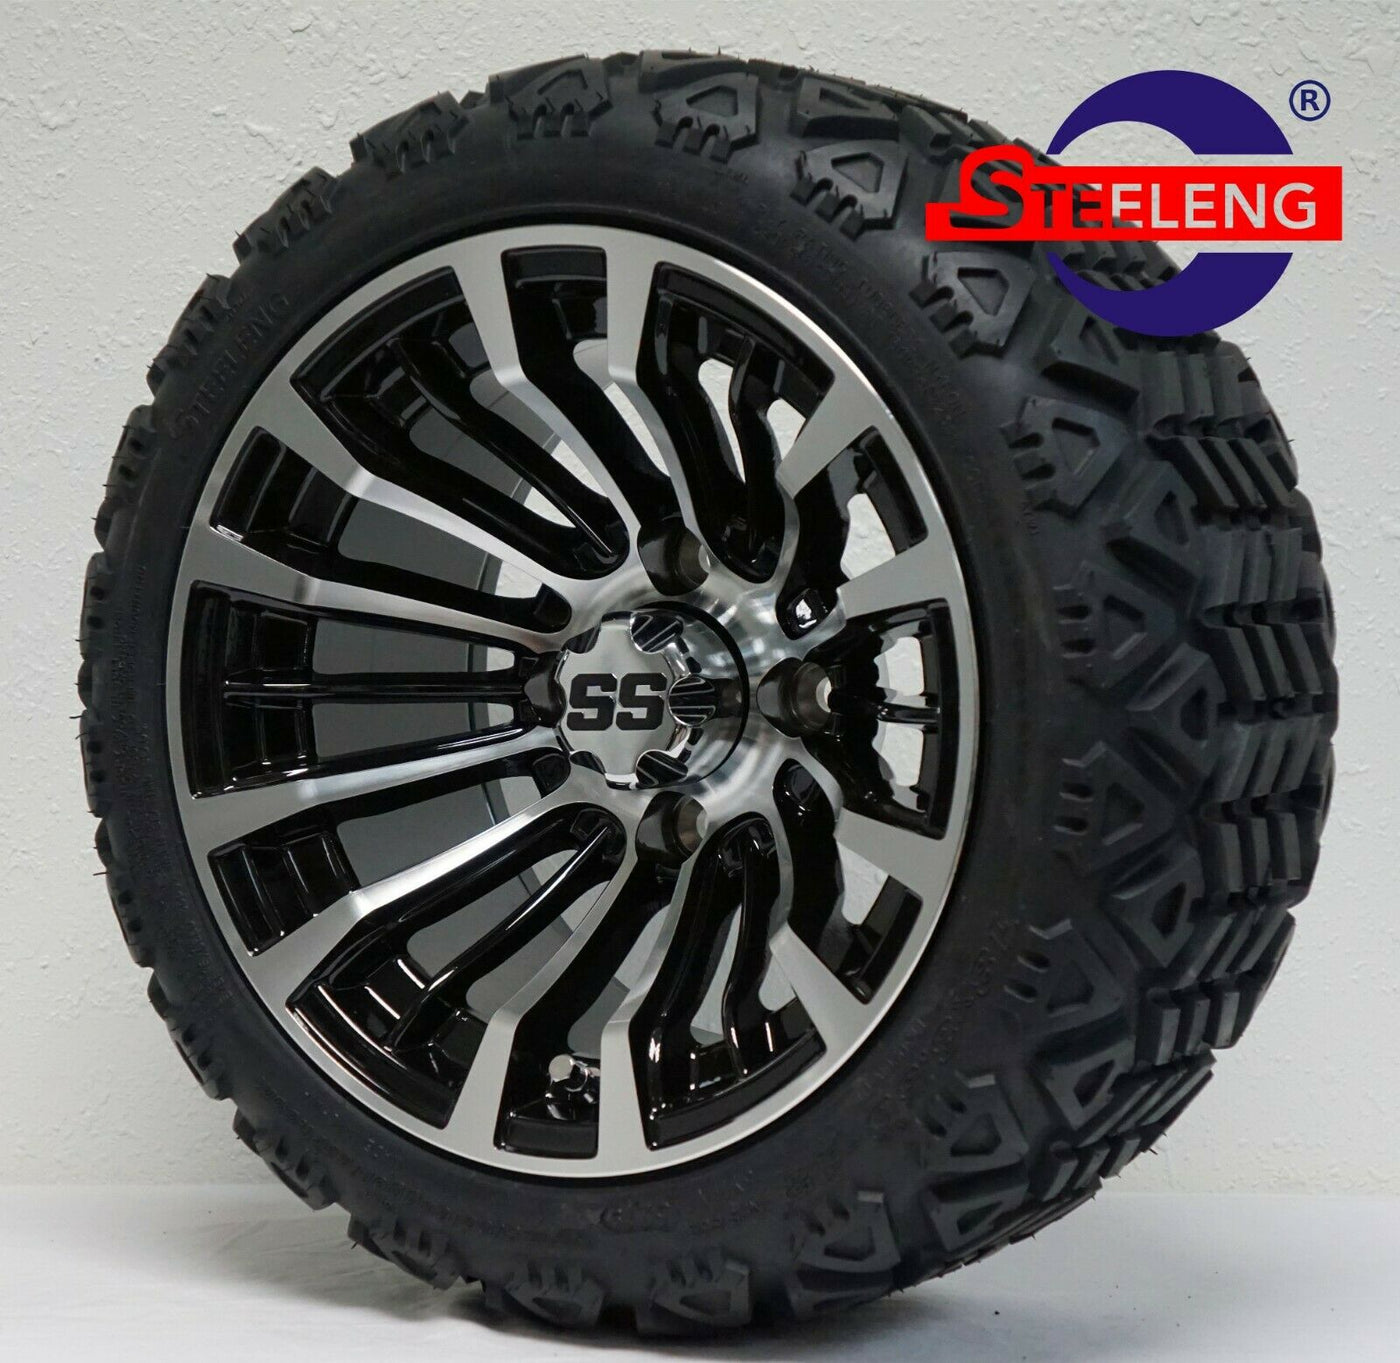 12" MATADOR MACHINED / BLACK GOLF CART WHEELS and 12x7-18 ALL TERRAIN TIRES (SET OF 4) WITH LUGS